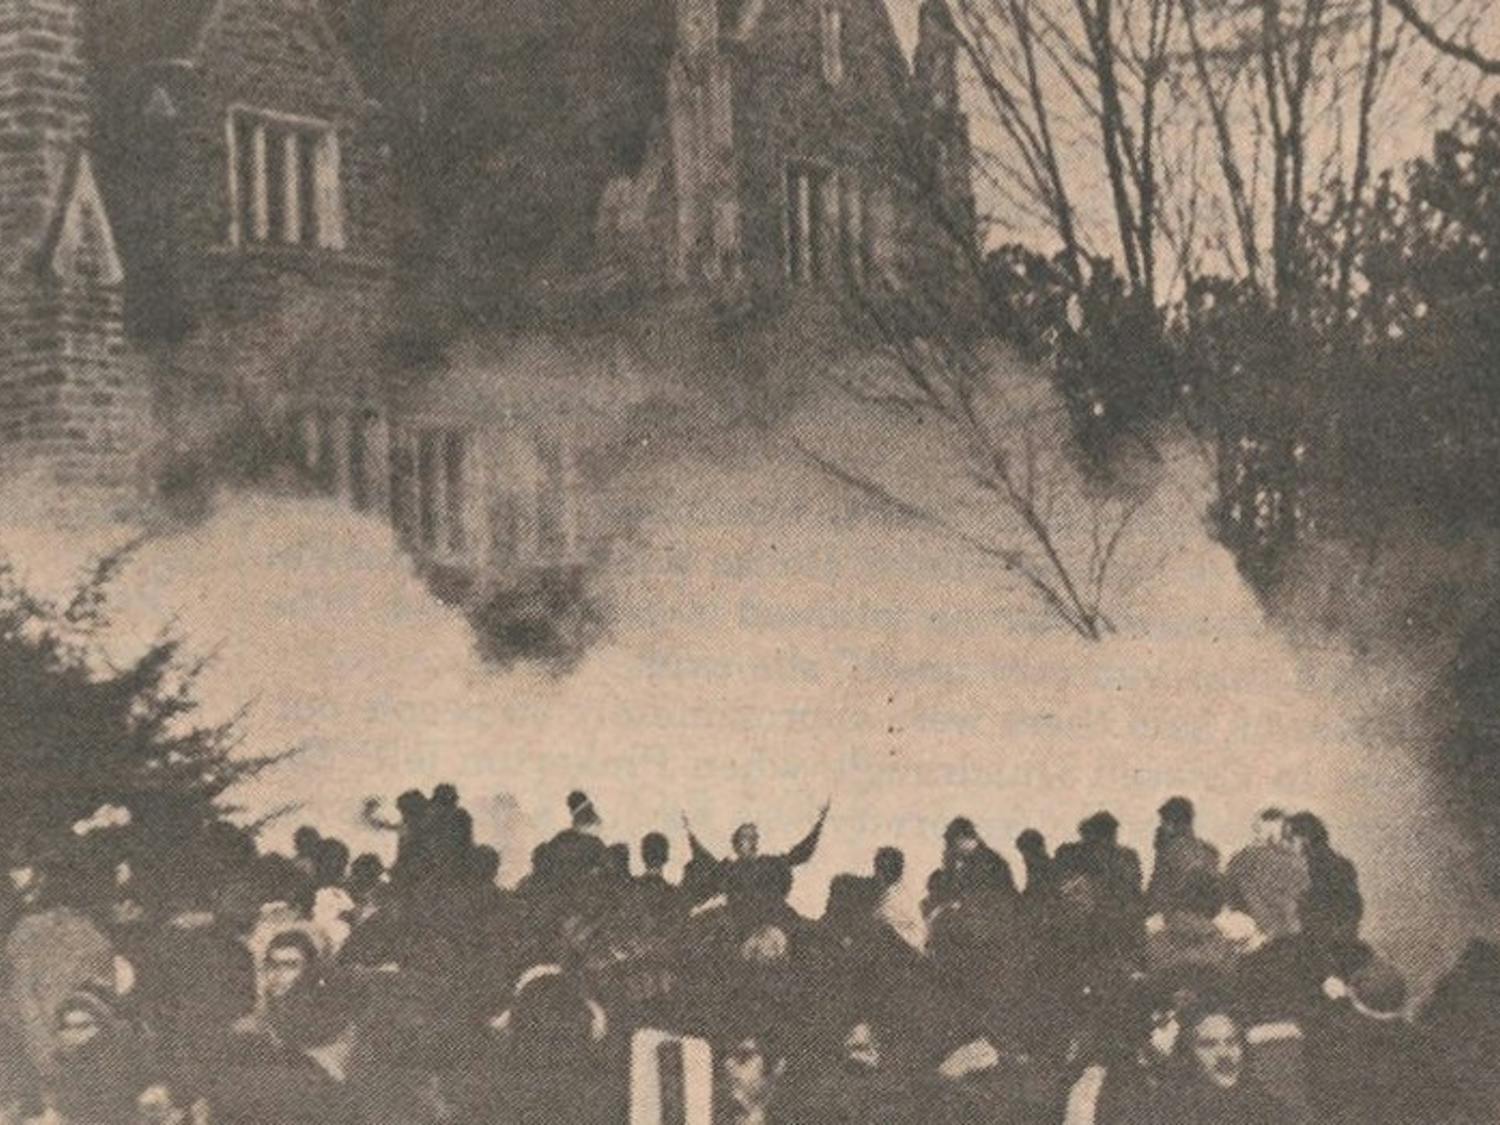 About 75 students organized by the Afro-American Society were met with tear gas after occupying the Allen Building for 10 hours on Feb. 13, 1969.